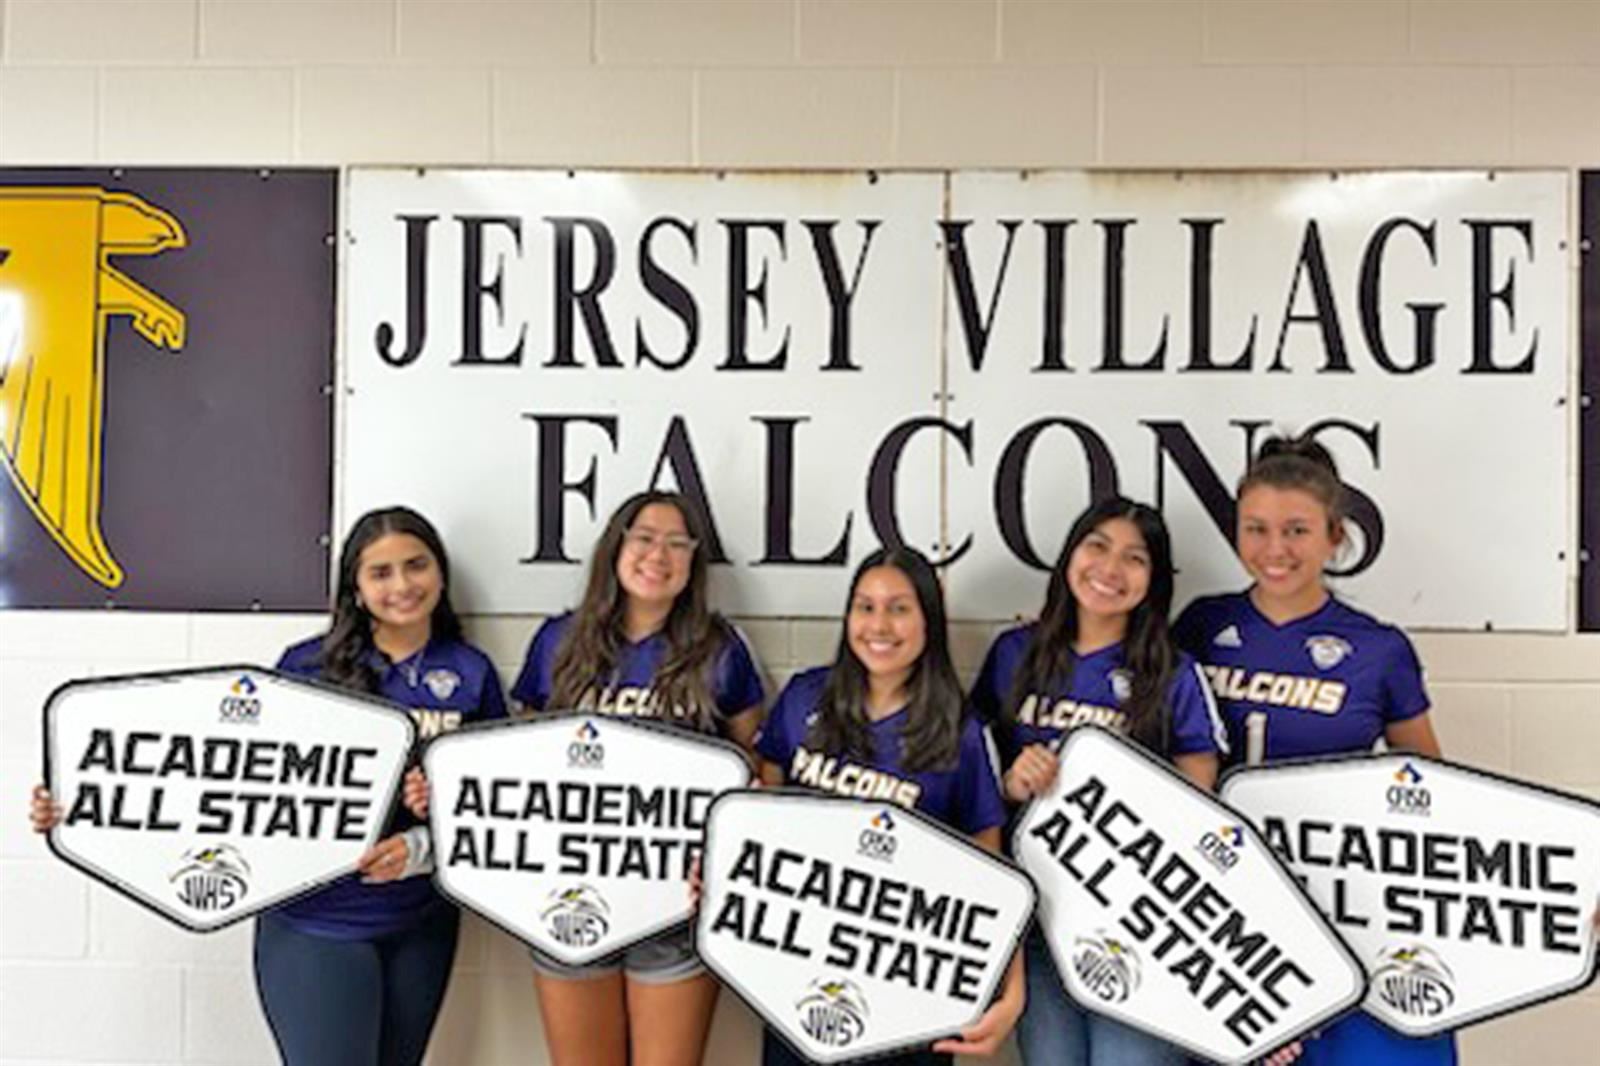 Five Jersey Village High School seniors pose for a photo recognizing them being named academic all-state.